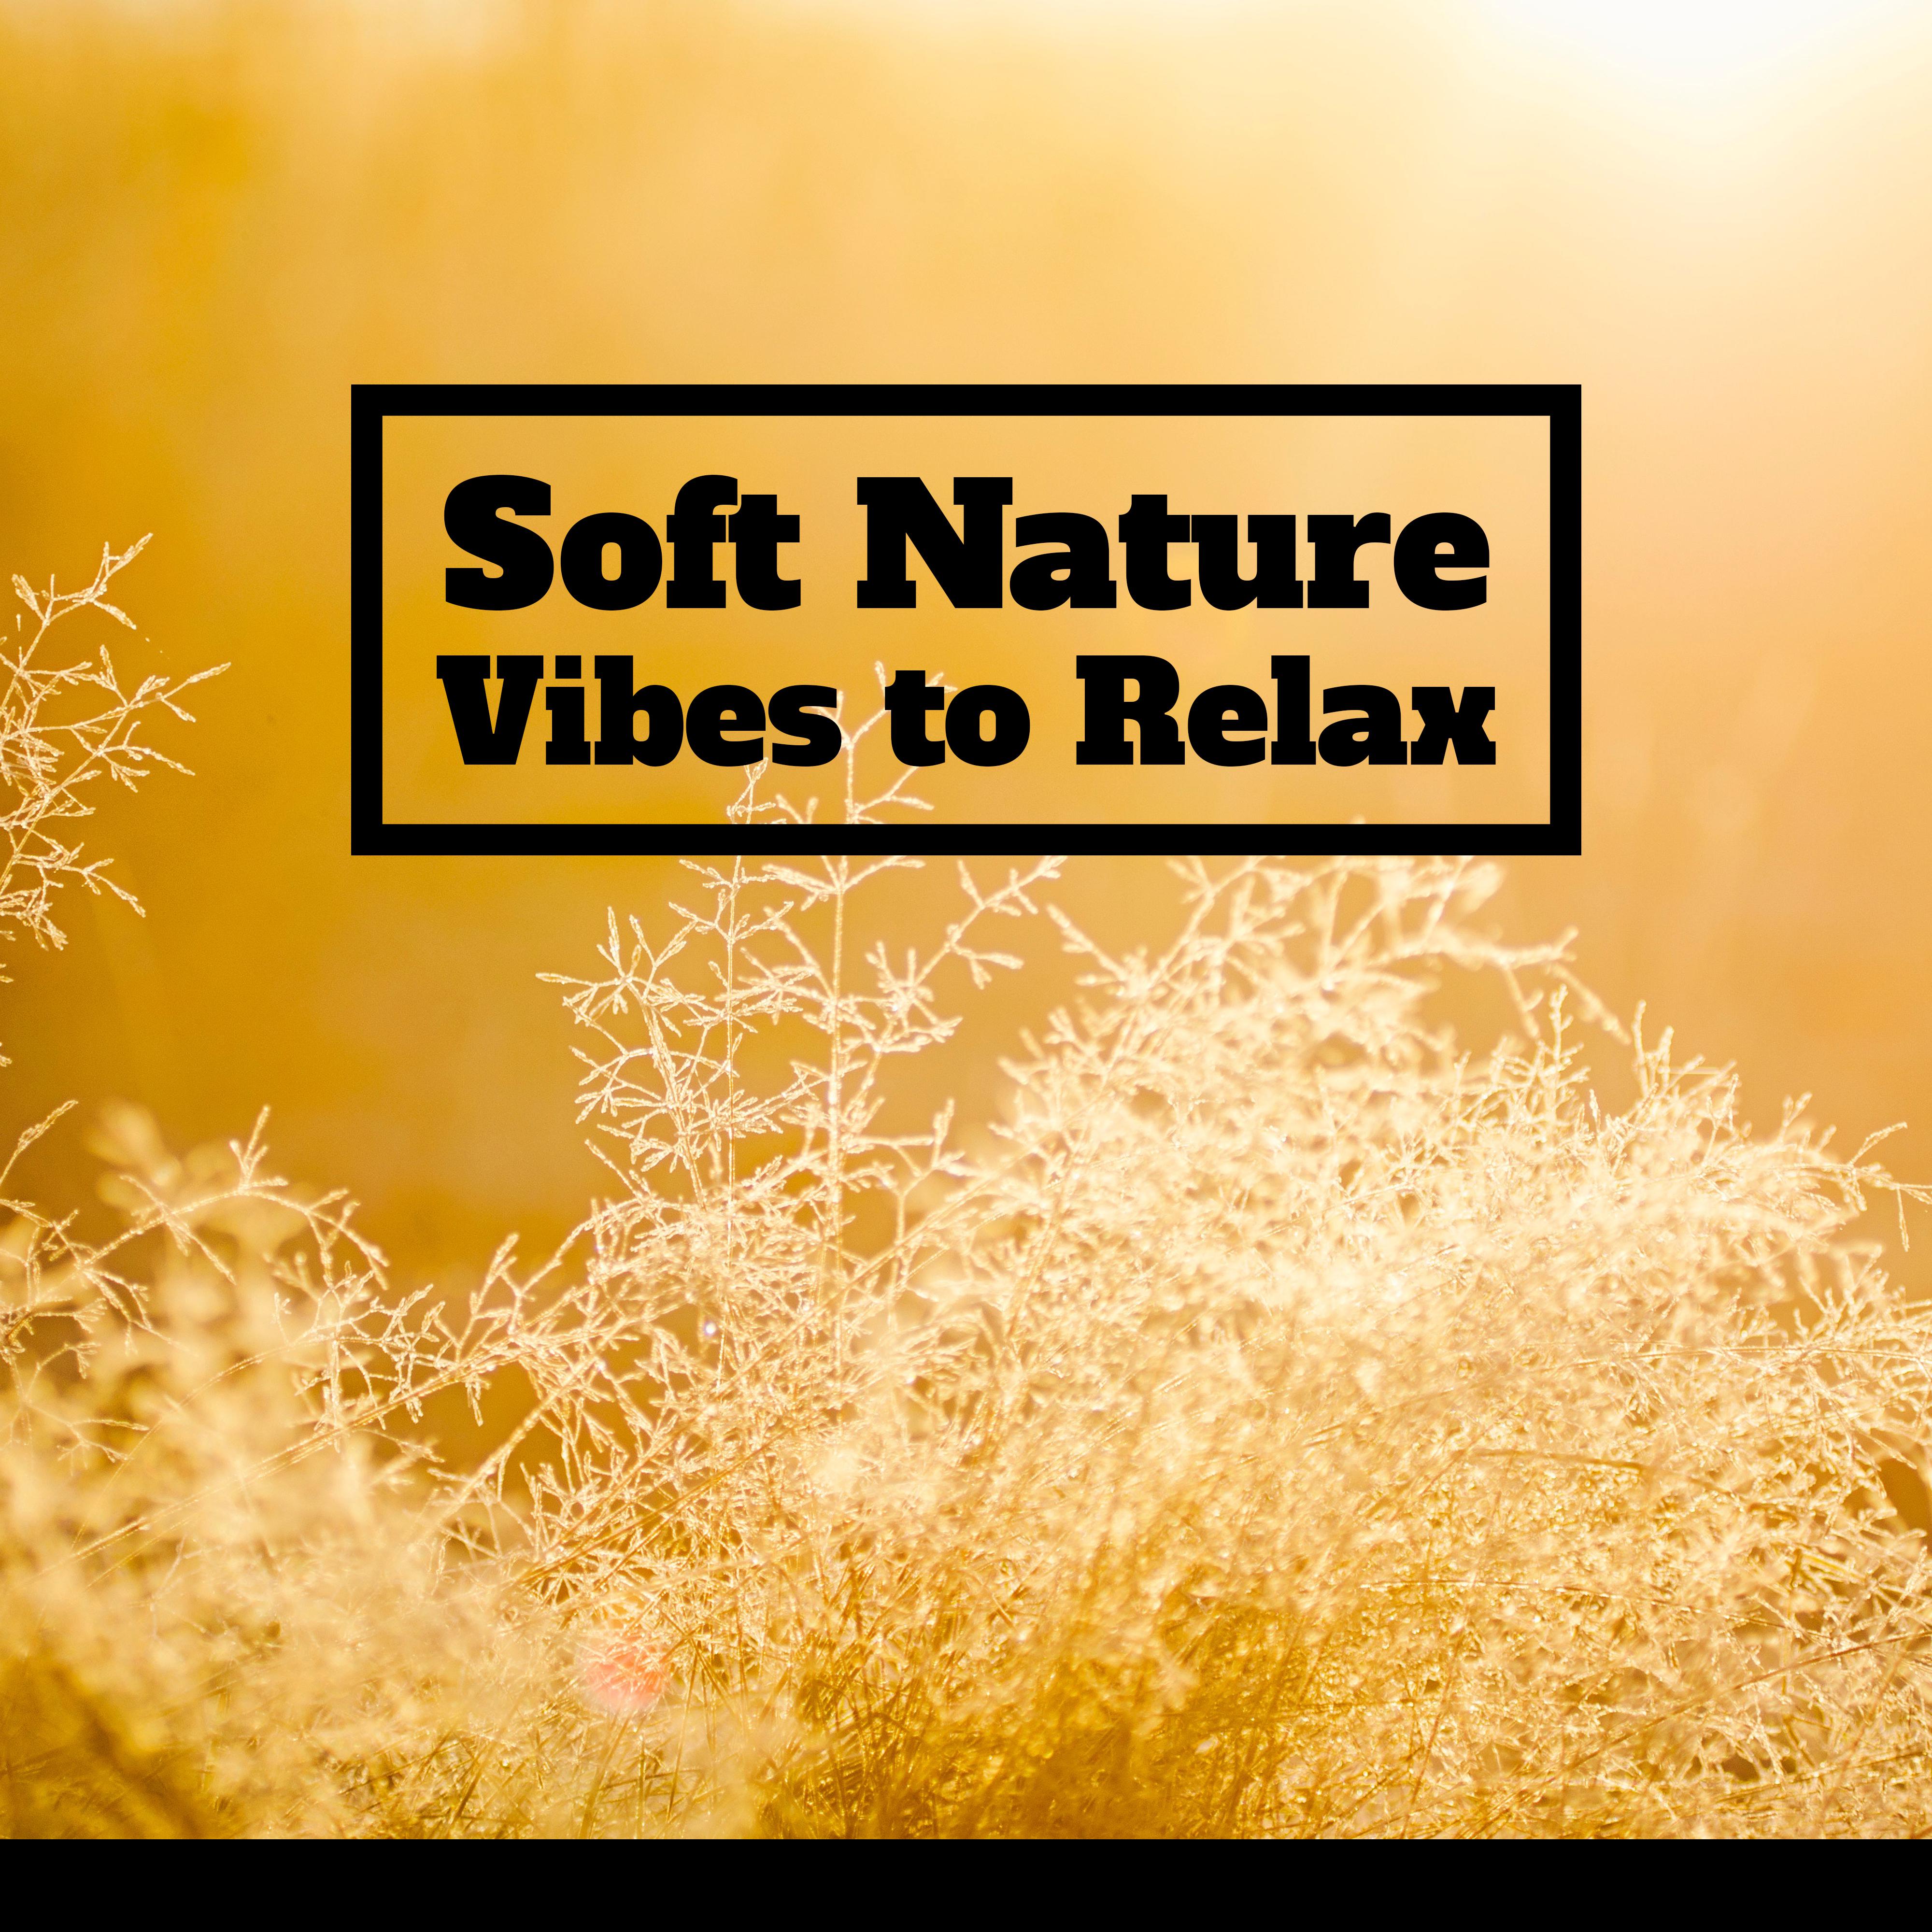 Soft Nature Vibes to Relax